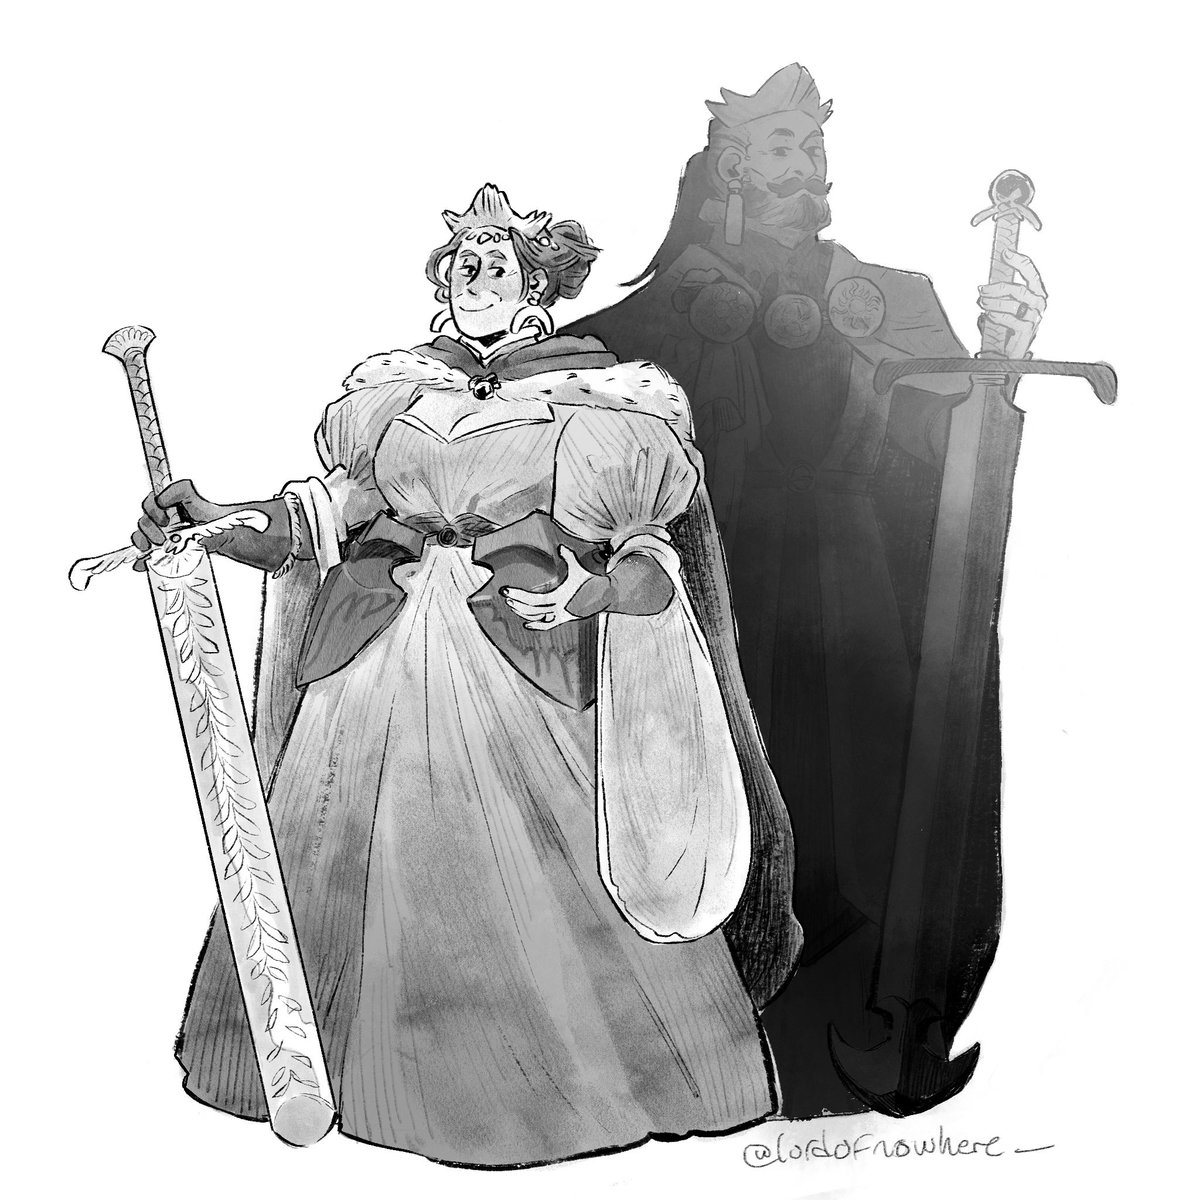 More from #swordtember - king and queen